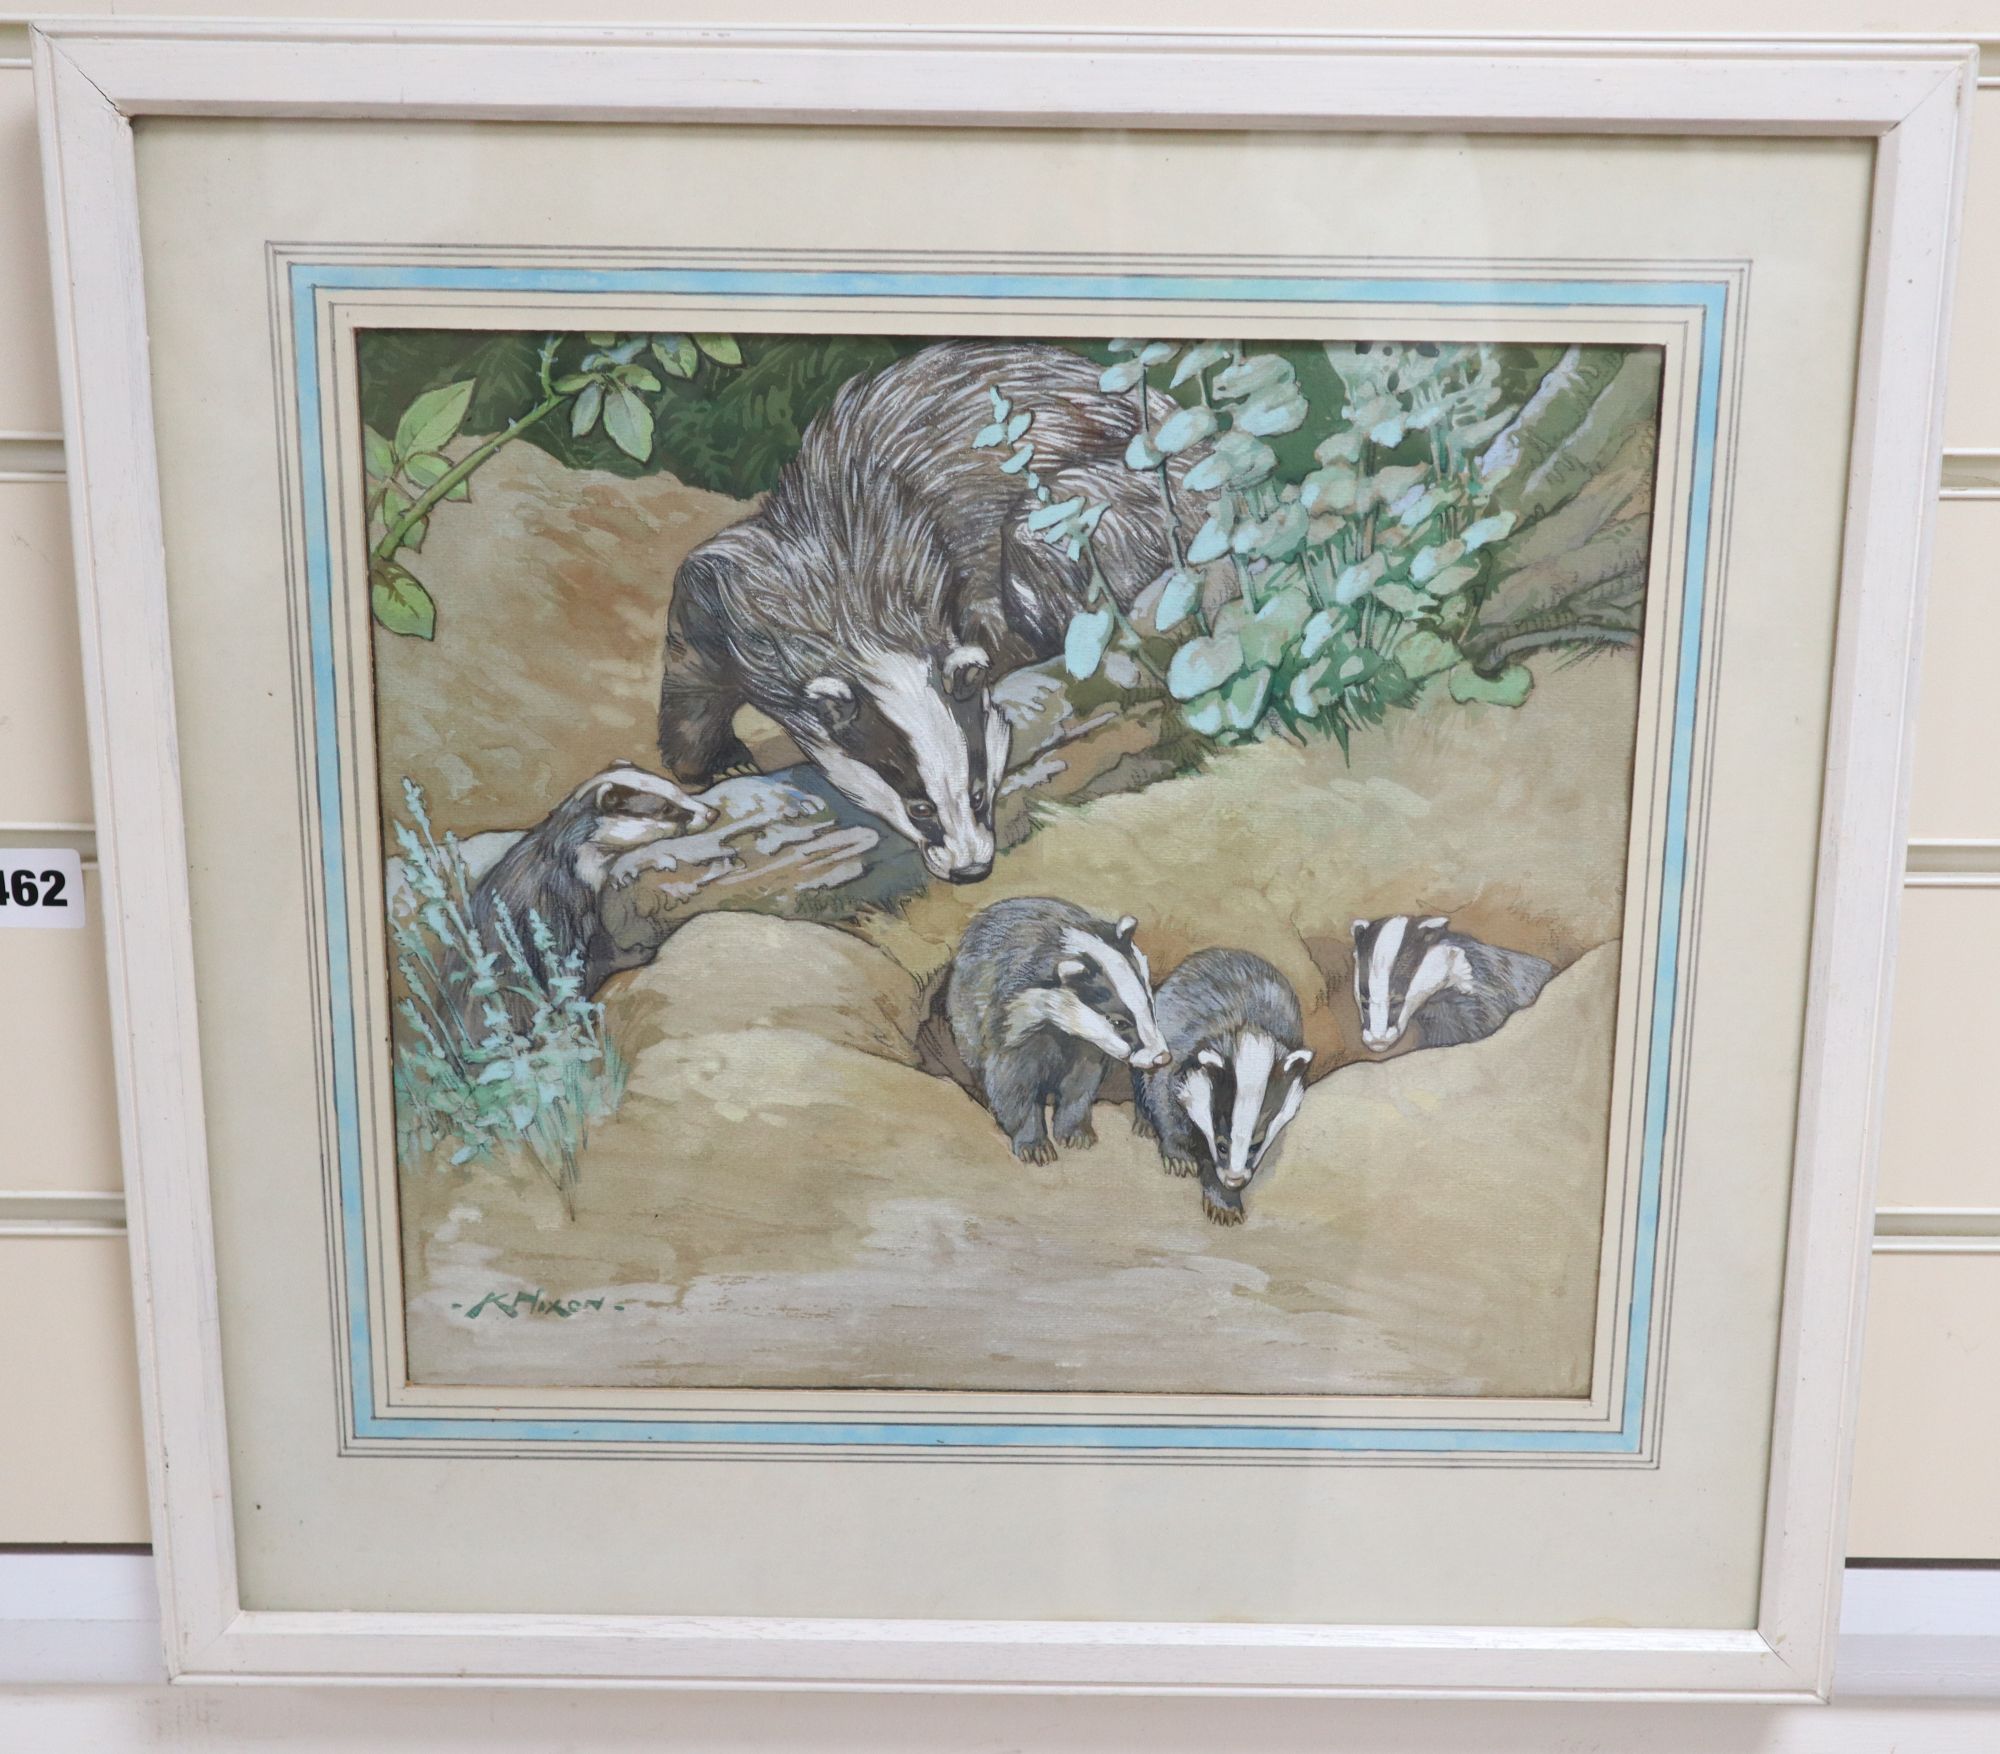 Kay Nixon (1895-1988), watercolour and gouache, Badgers, painted for the book Animal Mothers and Babies, signed, 28 x 31cm